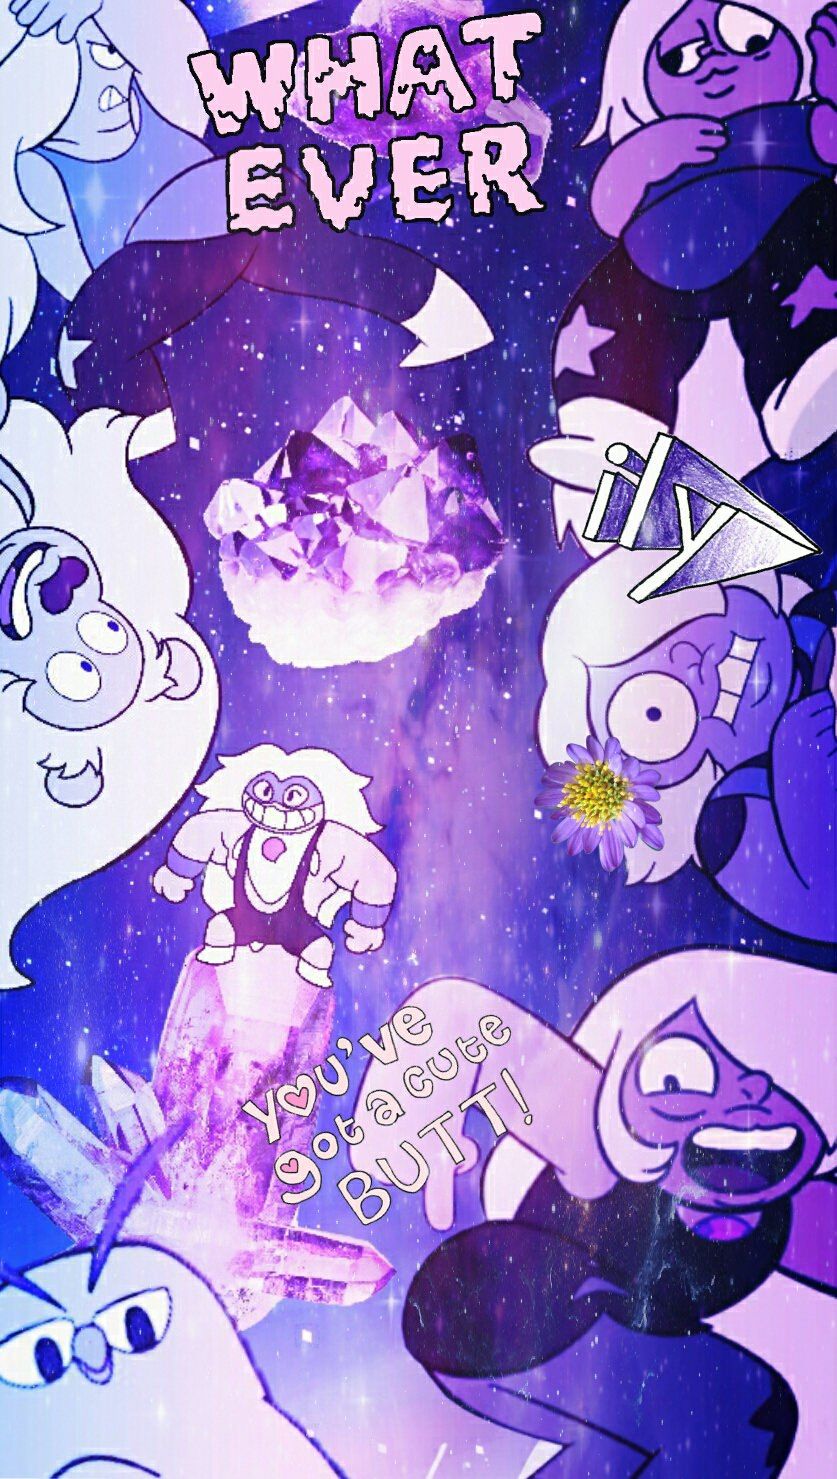 Steven Universe Wallpaper  Free Wallpapers for iPhone Android Desktop   Phone